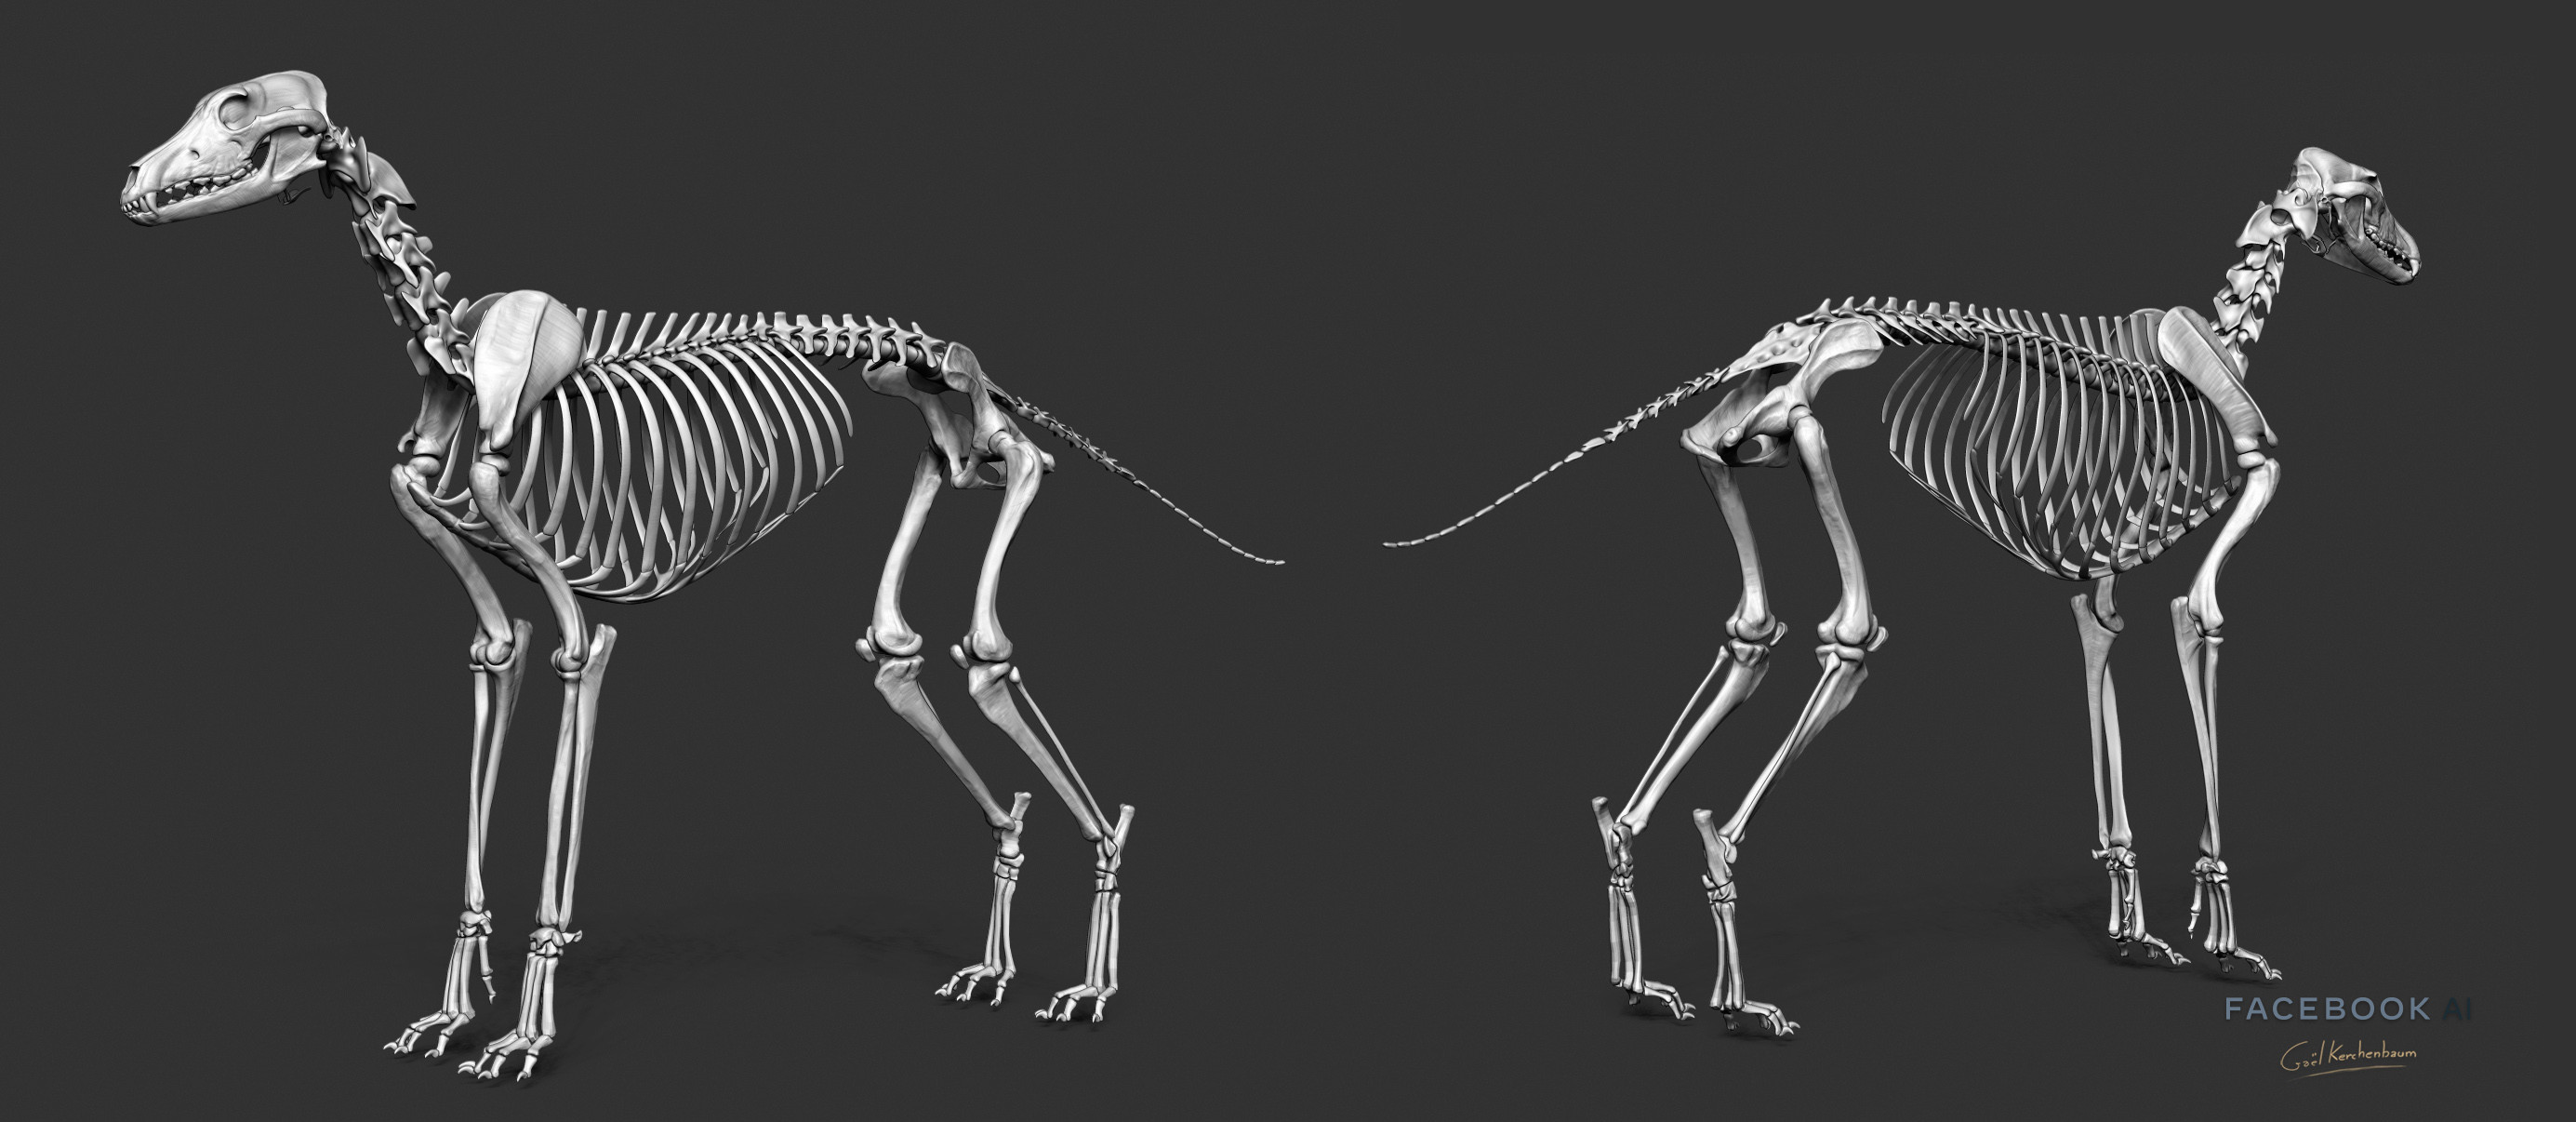 Galgo skeleton. This pass was the first to be modeled to reduce Artistic Bias